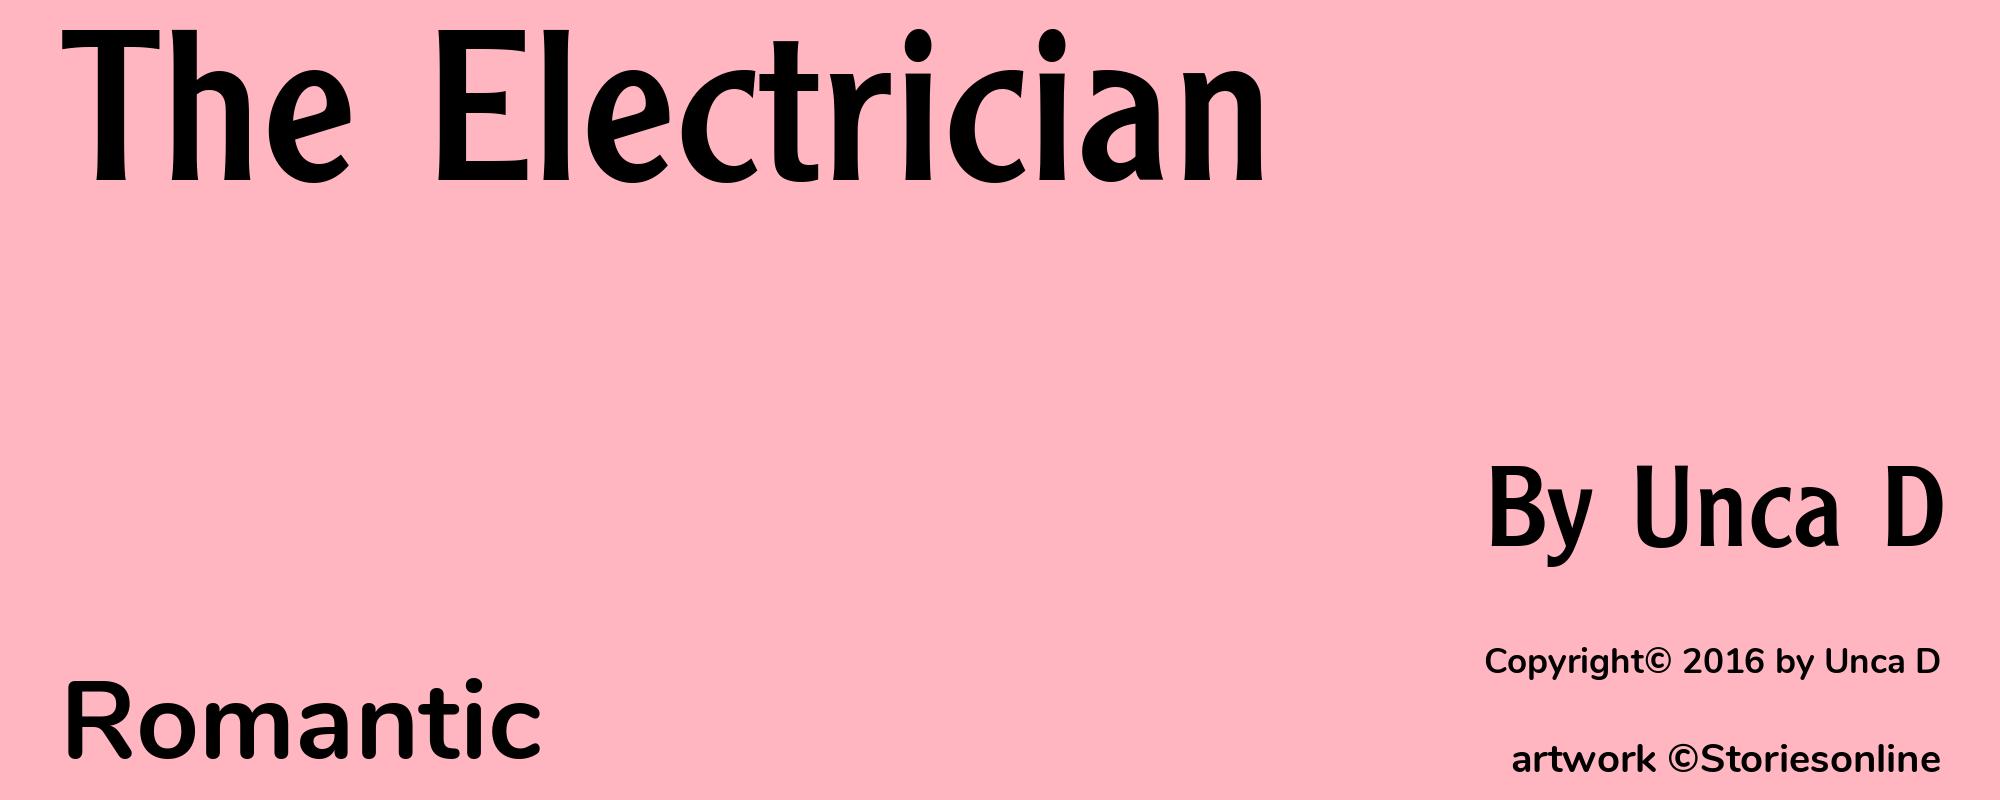 The Electrician - Cover